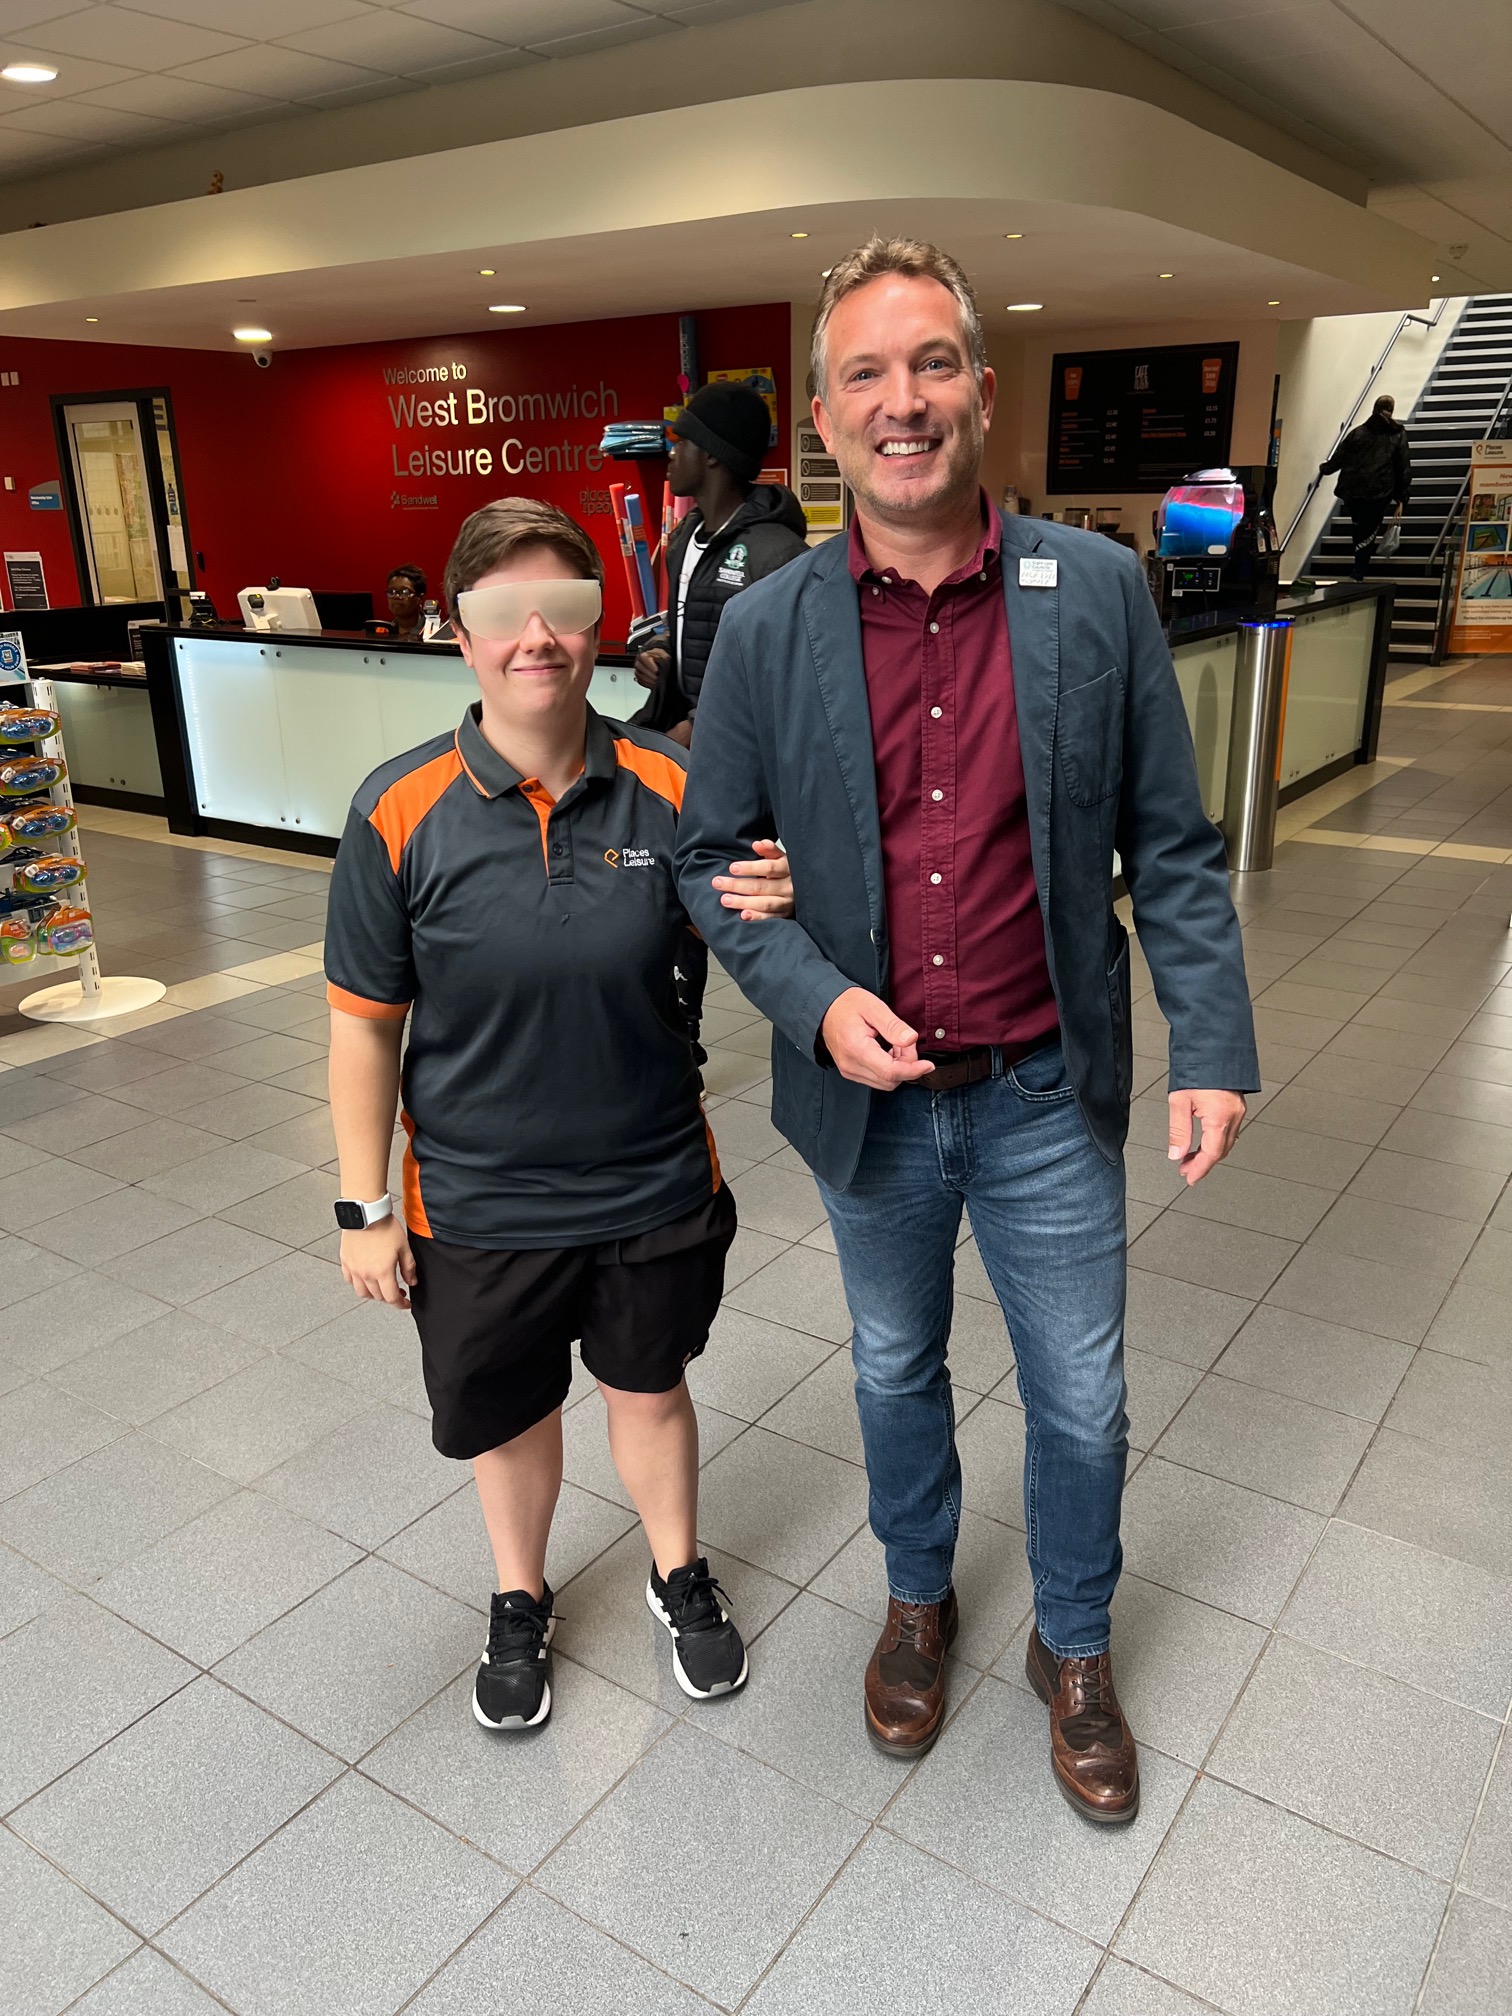 Image shows a member of staff from Places Leisure, West Bromwich, with Martyn Symcox, Head of Sport & Leisure at Thomas Pocklington Trust. The staff member is wearing sim specs, and holding on to Martyn's arm. Both are looking at the camera and smiling.